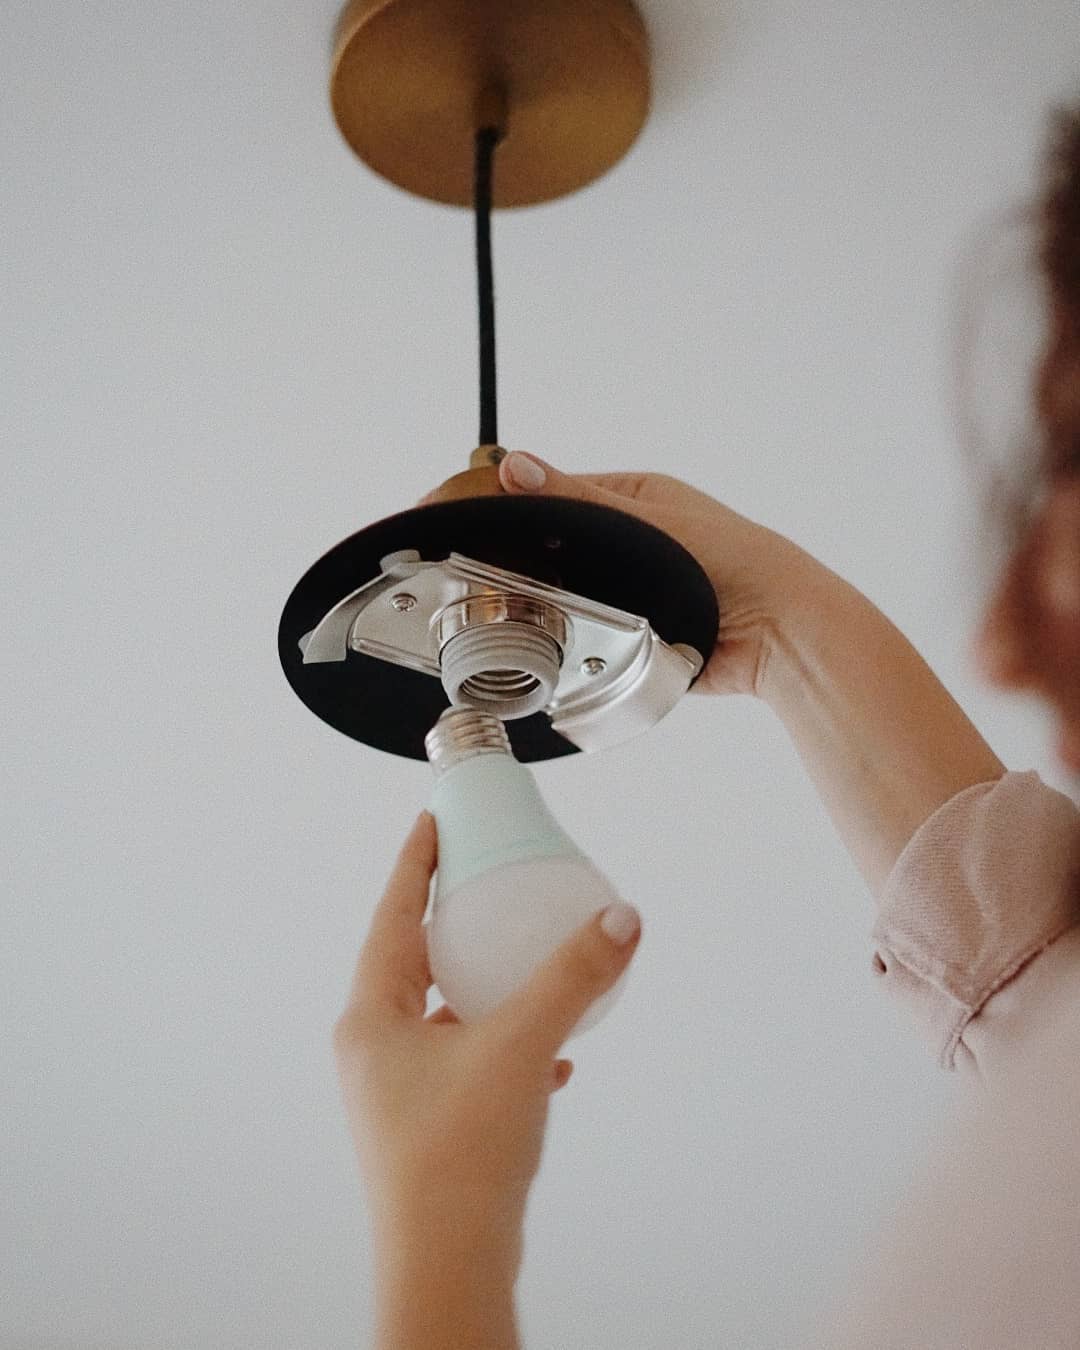 Woman changing light bulb. Photo by Instagram user @soraahome